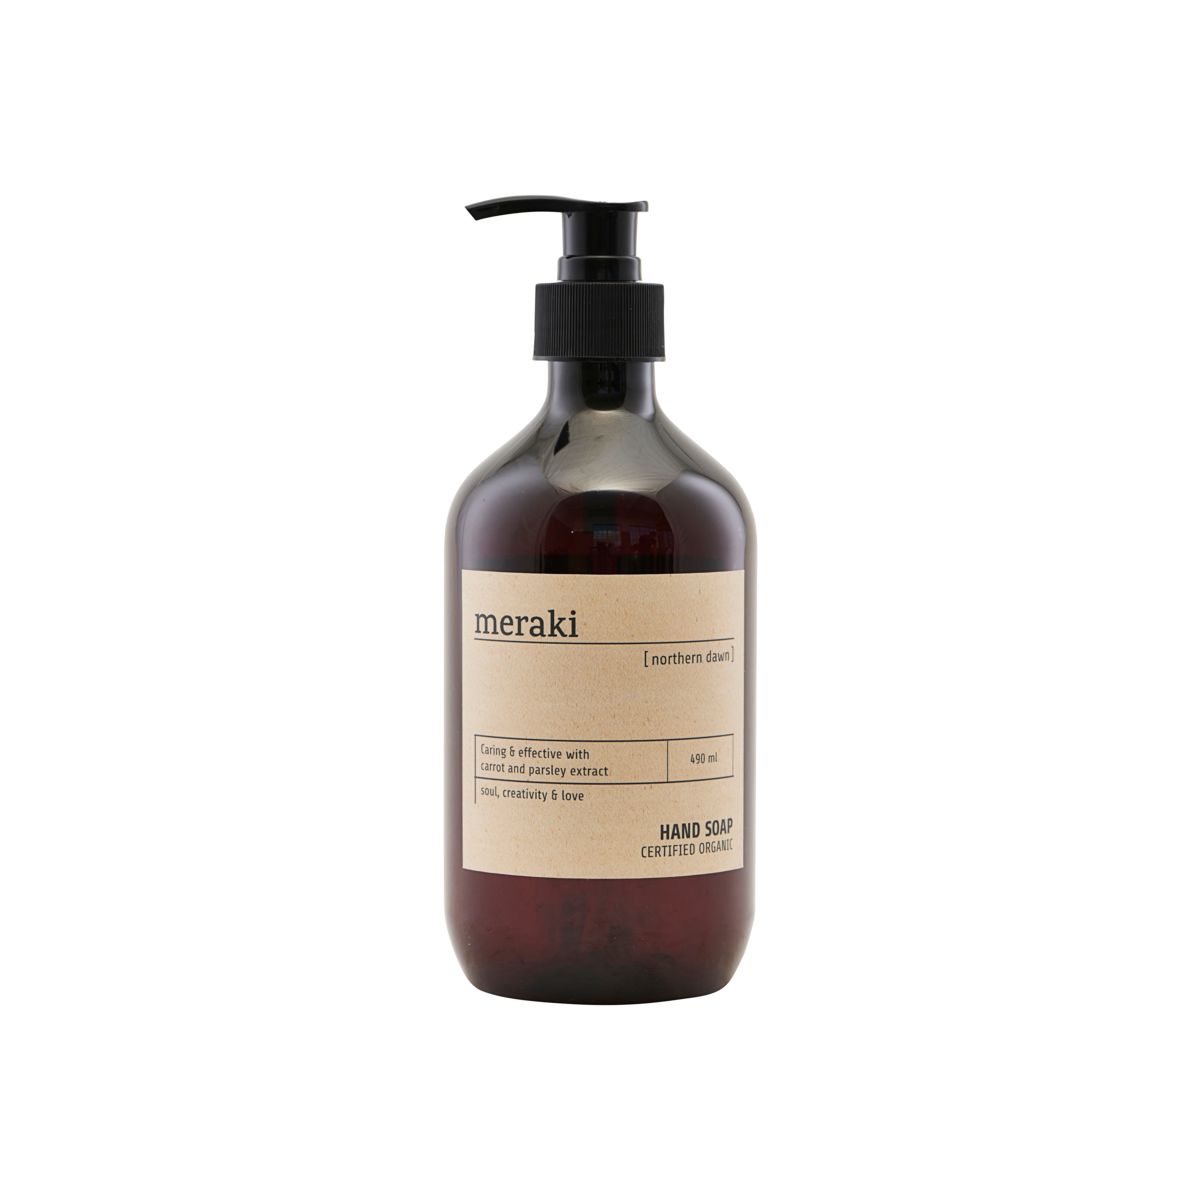  Nothern Dawn Hand Soap